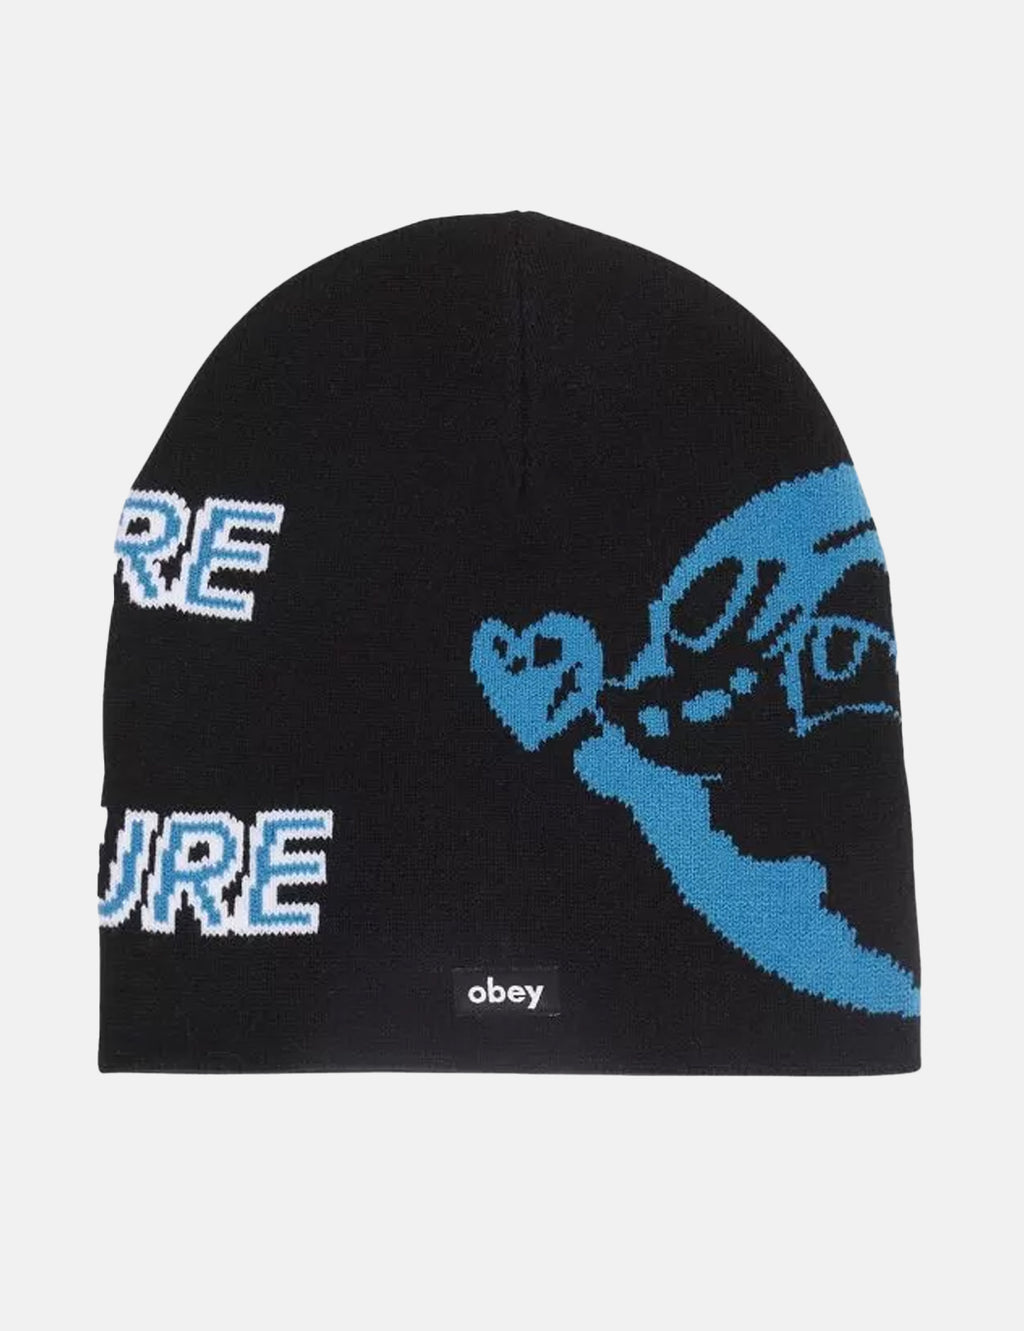 And Obey Urban EXCESS Black – Hat - Excess. Nuture Beanie Nature URBAN I